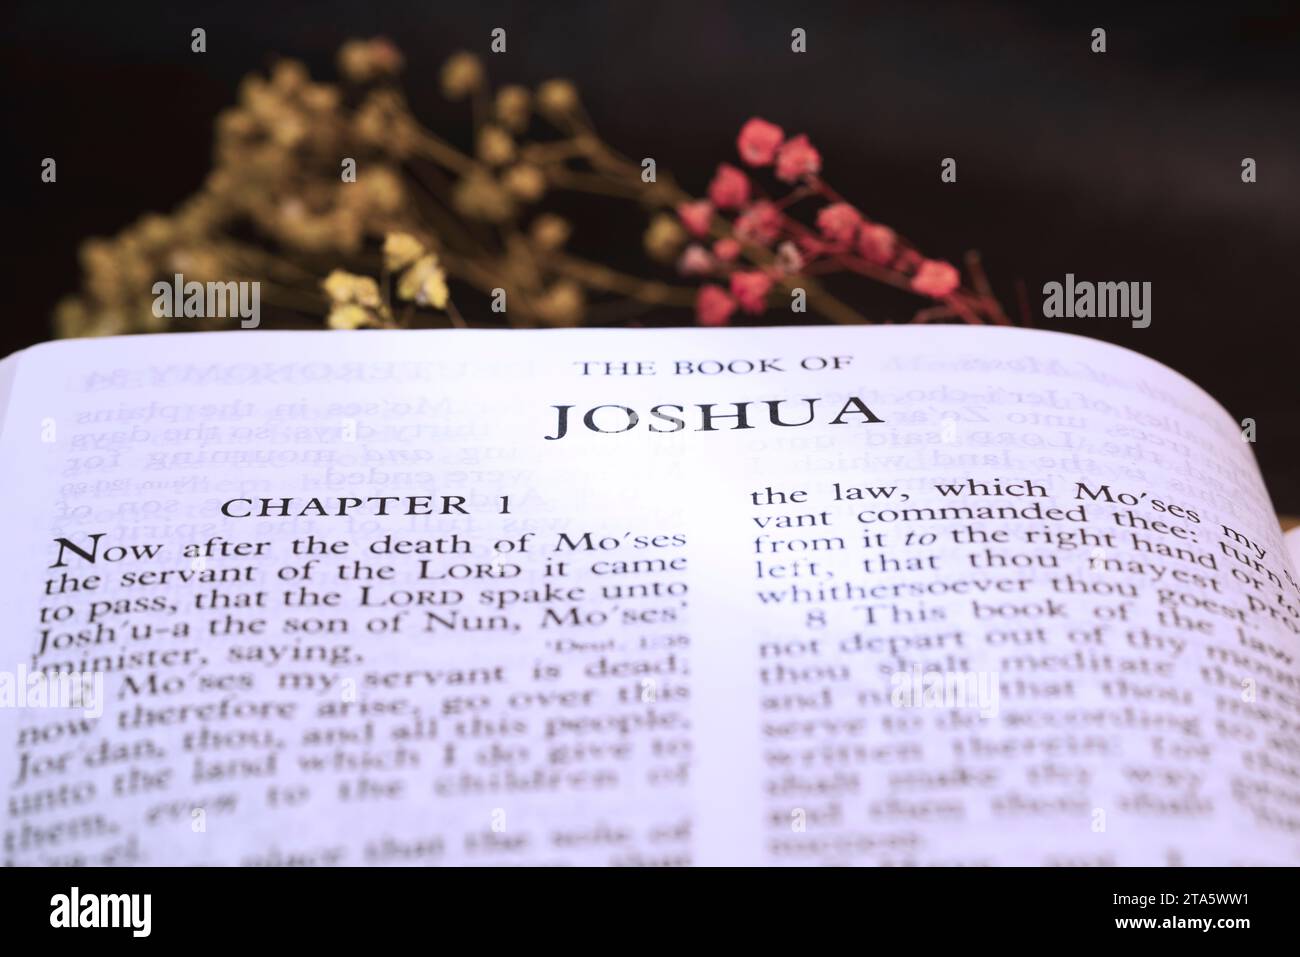 The book of Joshua of Holybible book for background and study of many concept idea Stock Photo